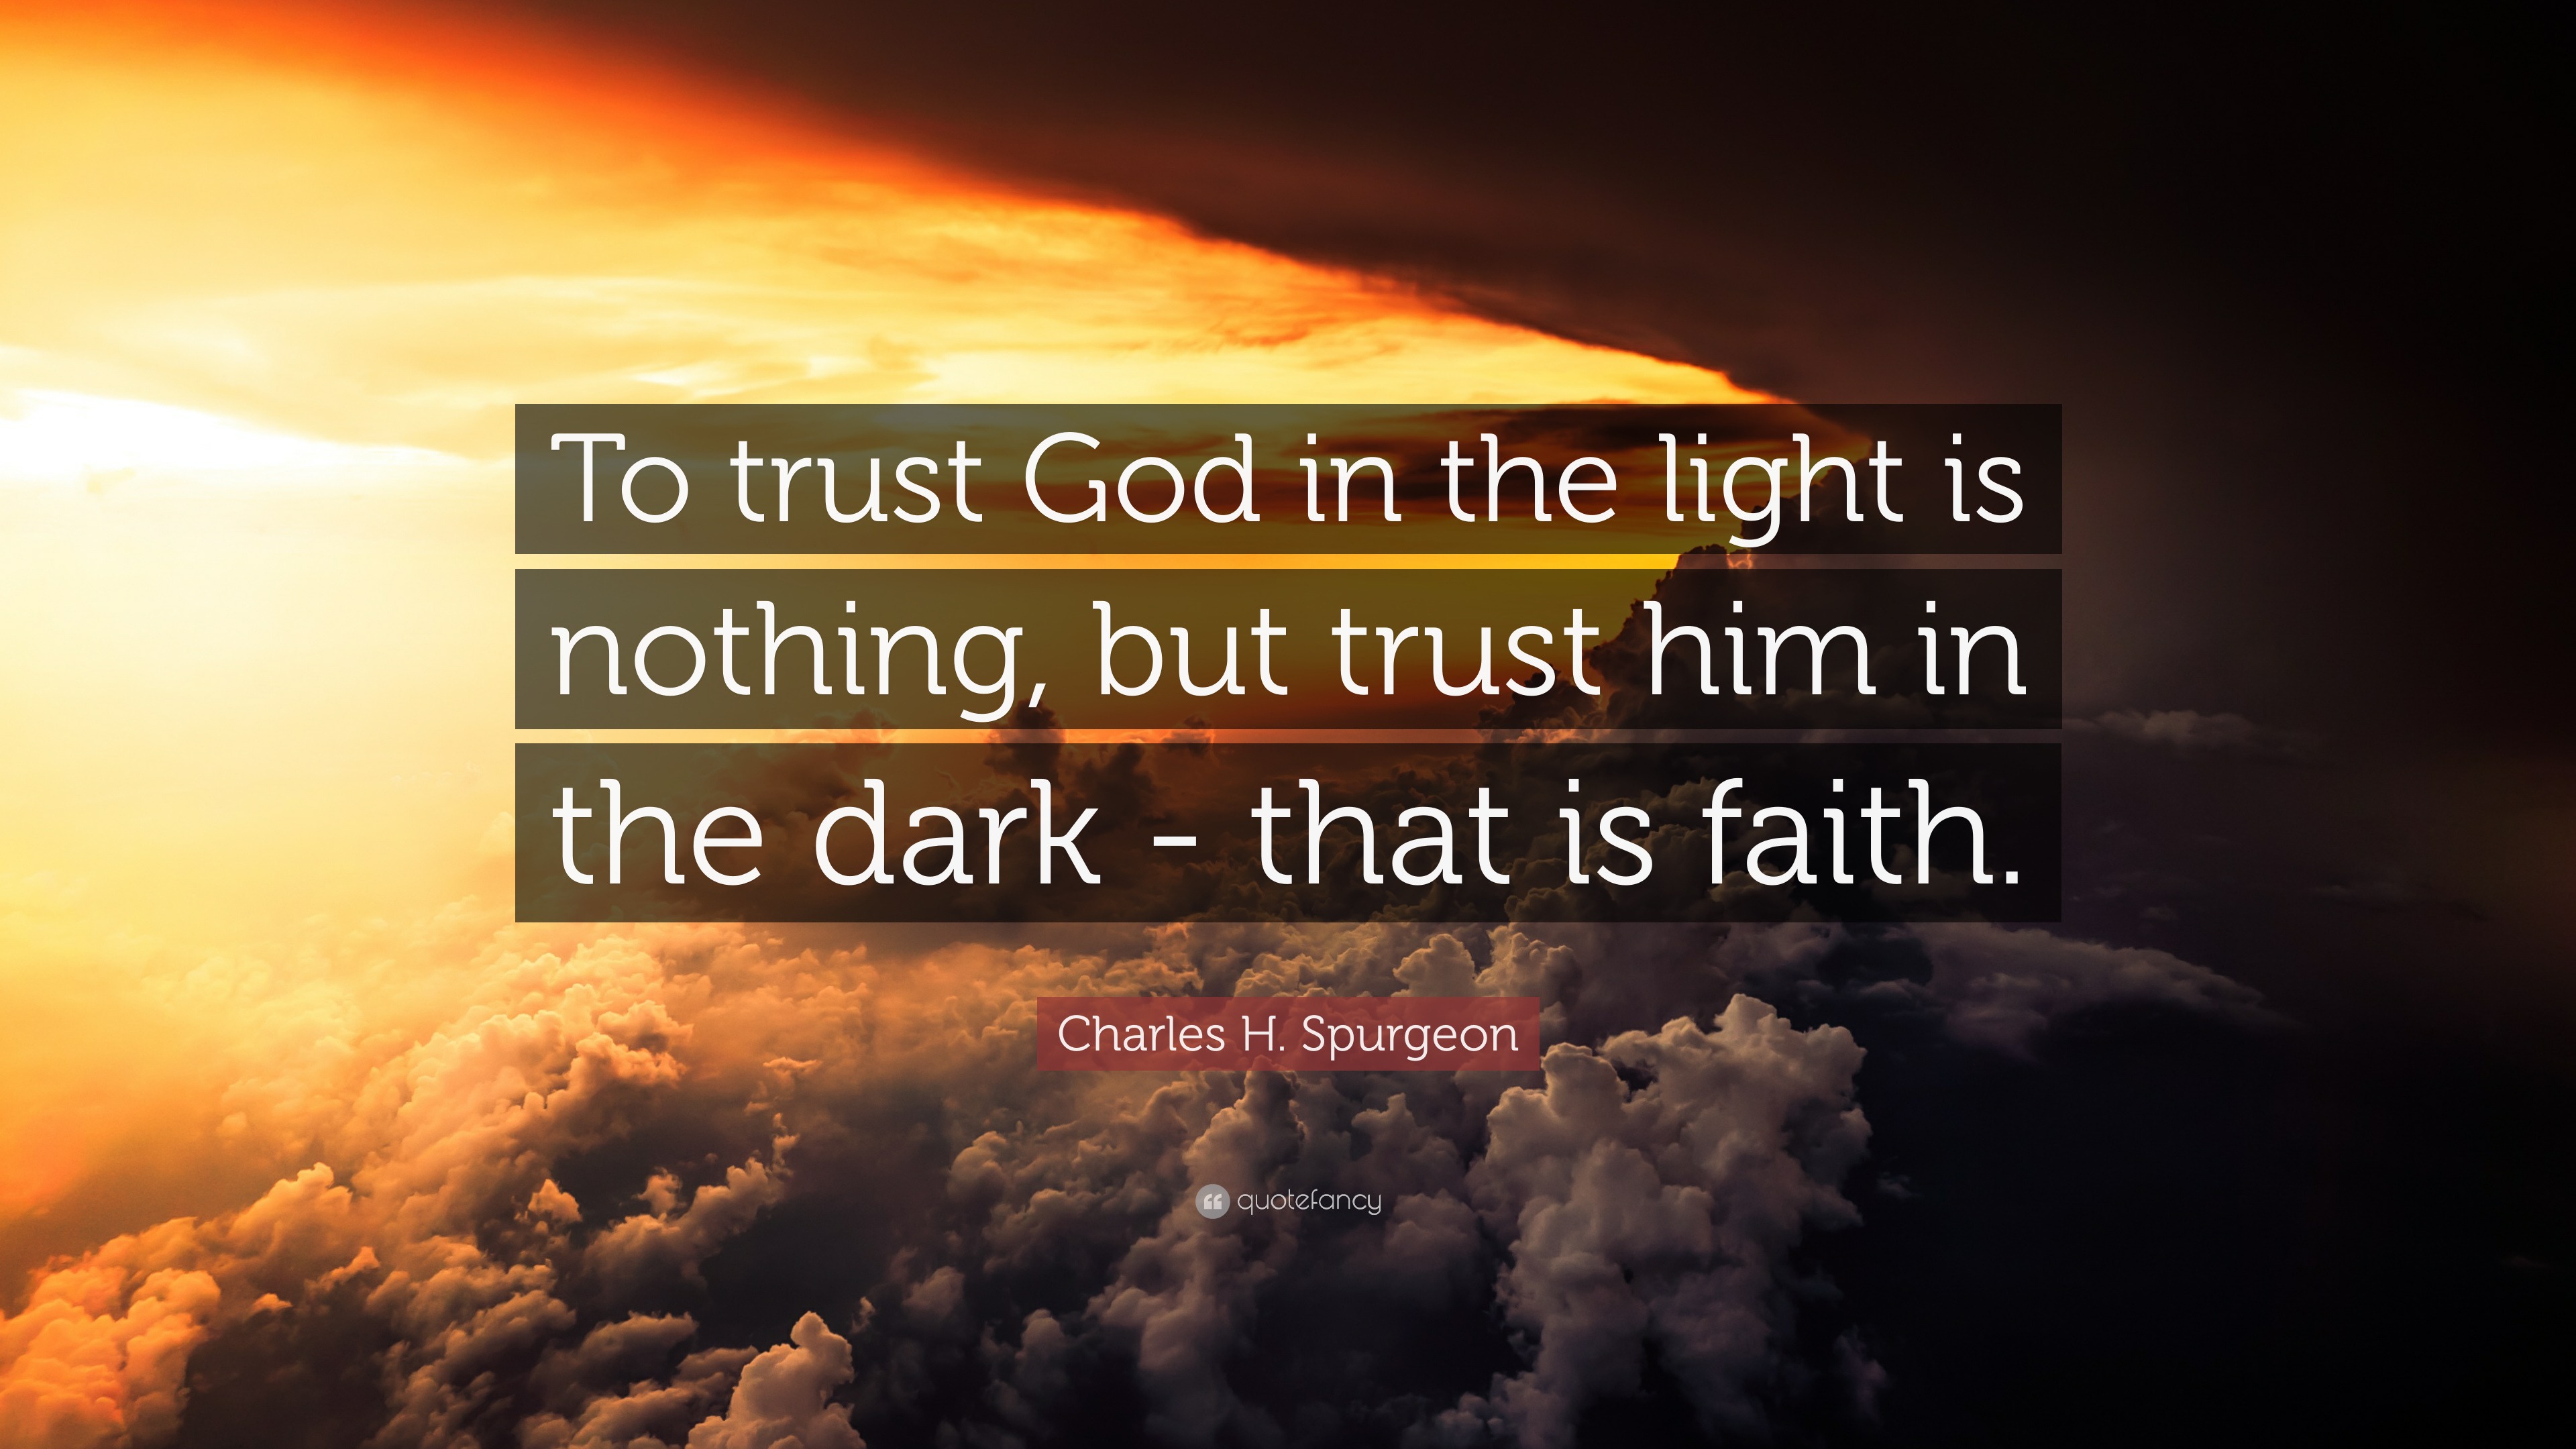 Charles H Spurgeon Quote  To trust  God  in the light is 